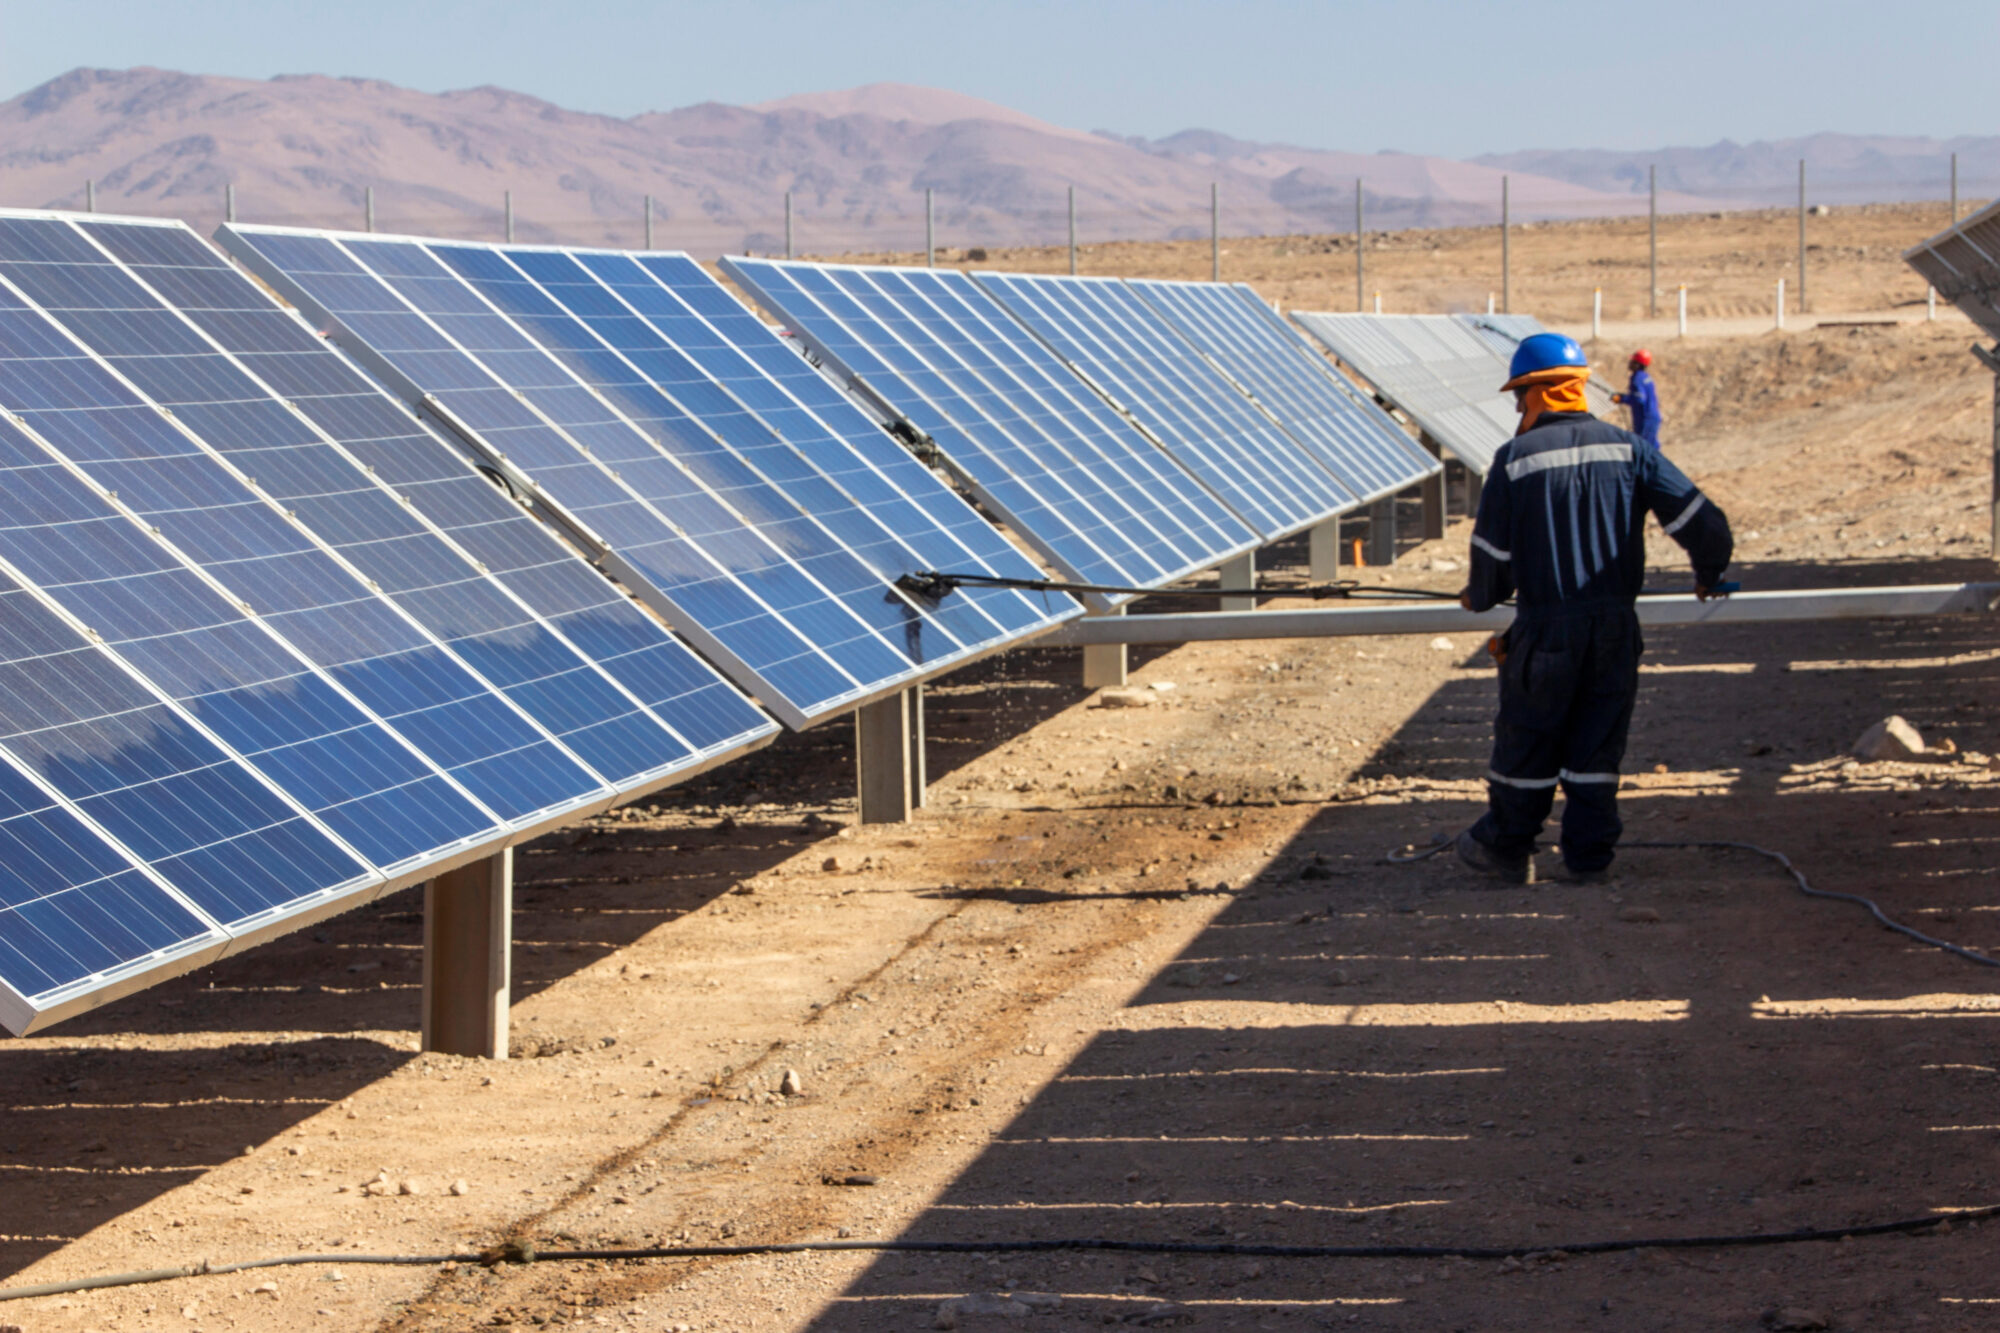 A worker cleans solar panels in Chile's Atacama Desert.